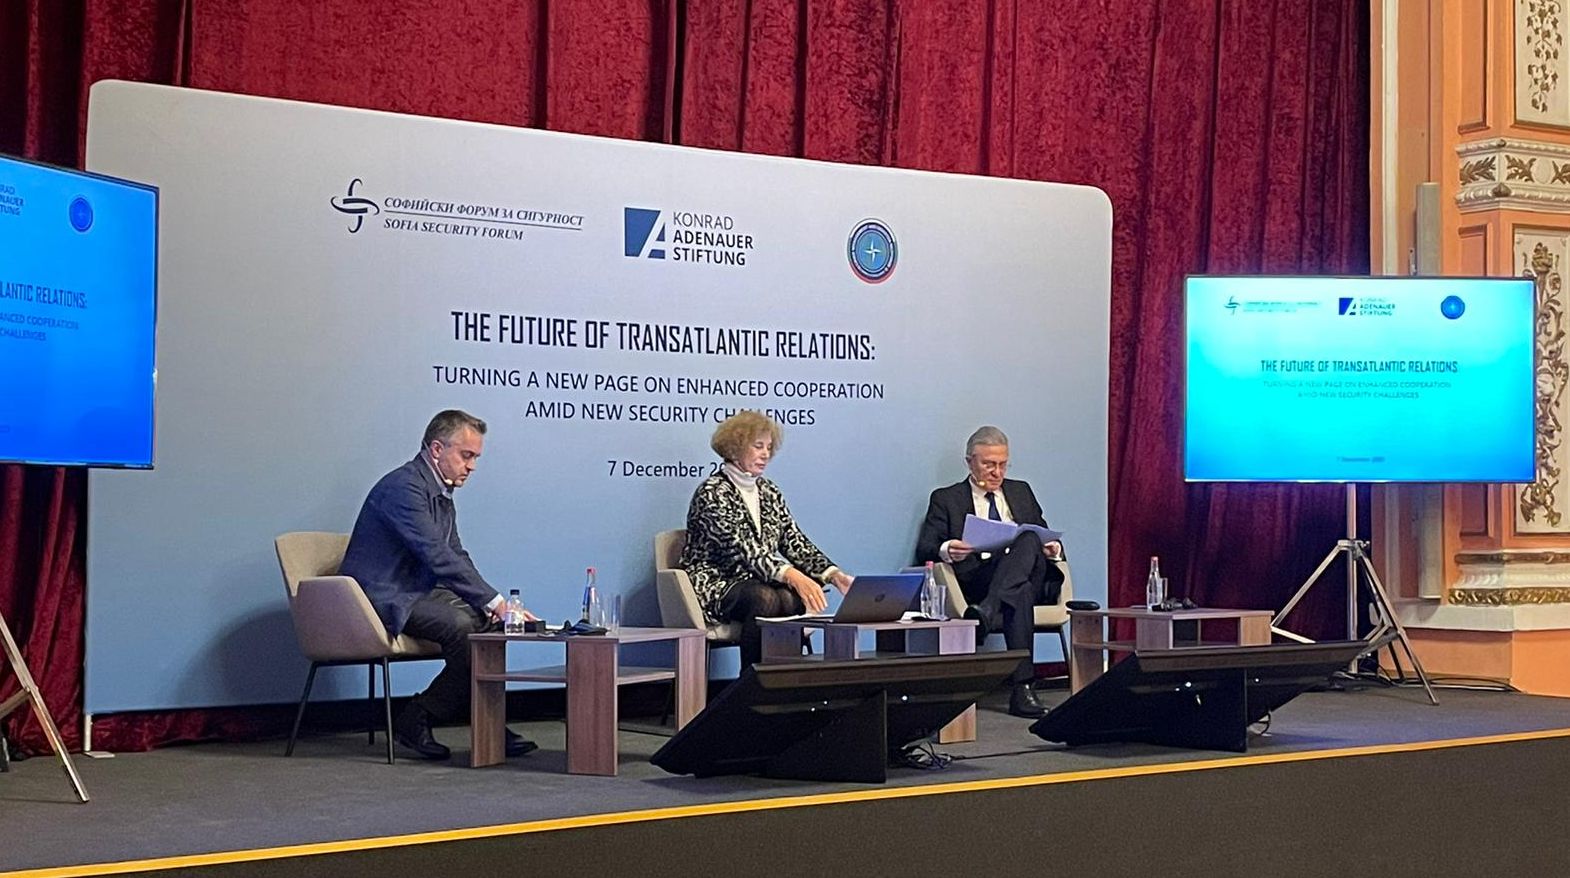 NSC at Sofia: The Future of Transatlantic Relations: Turning a New Page on Enhanced Cooperation amid New Security Challenges